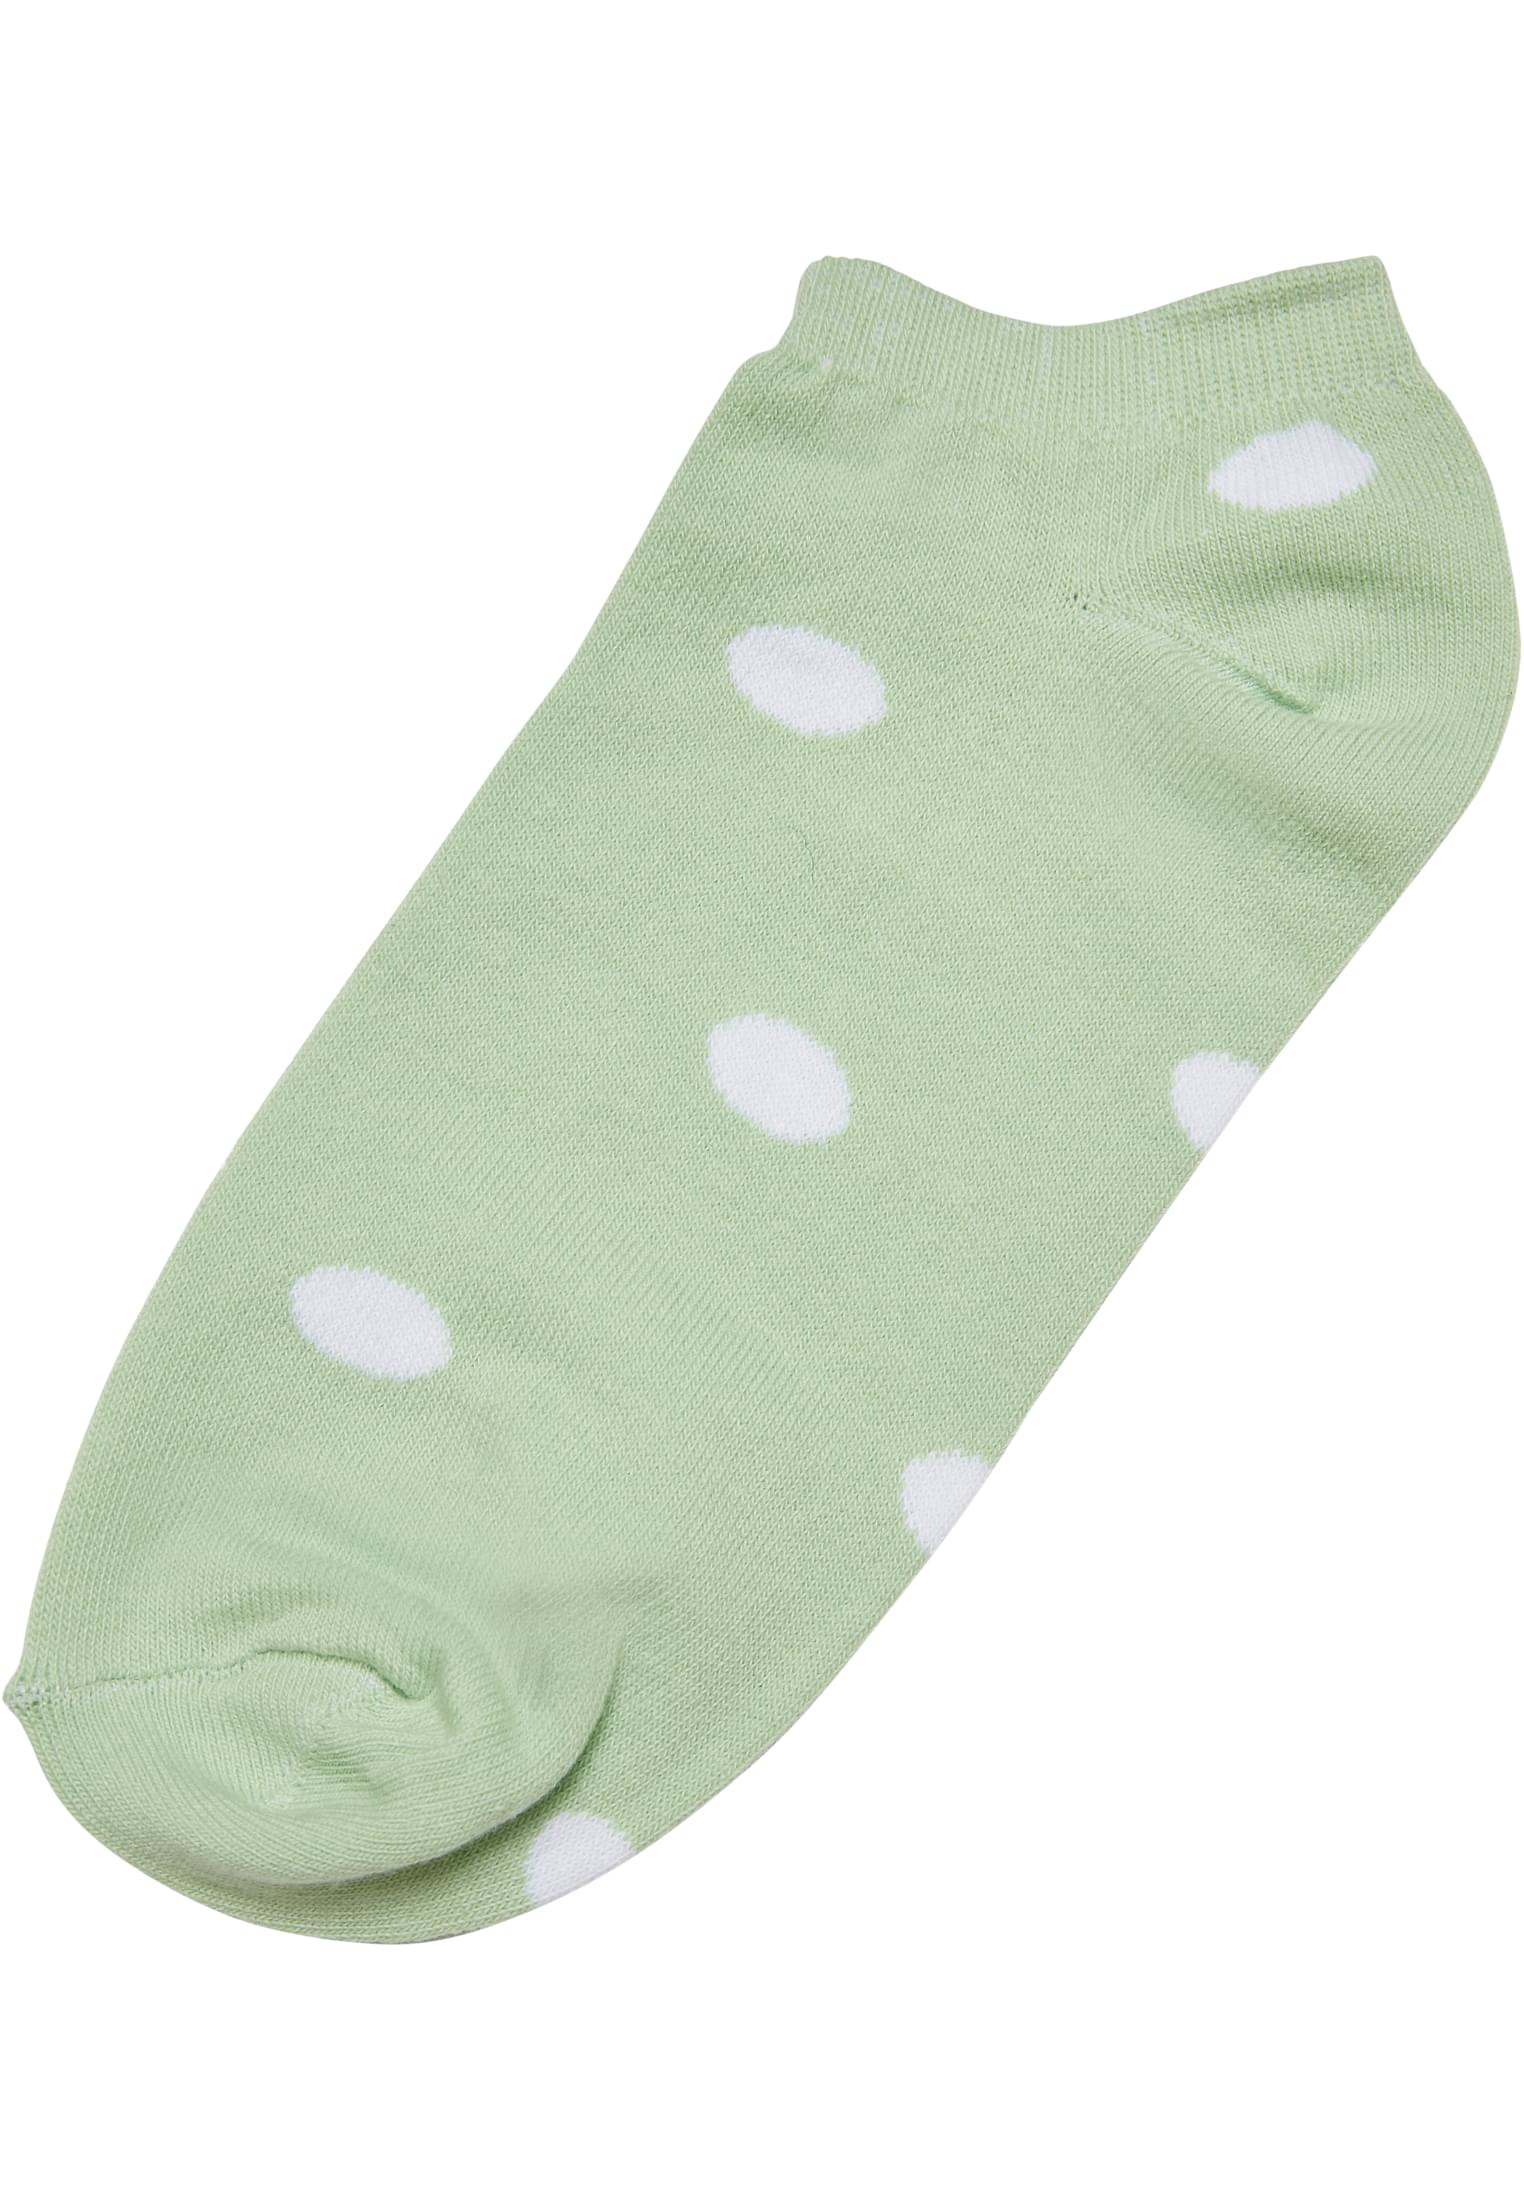 Accessoires No Show Socks Dots 5-Pack in Farbe summercolor